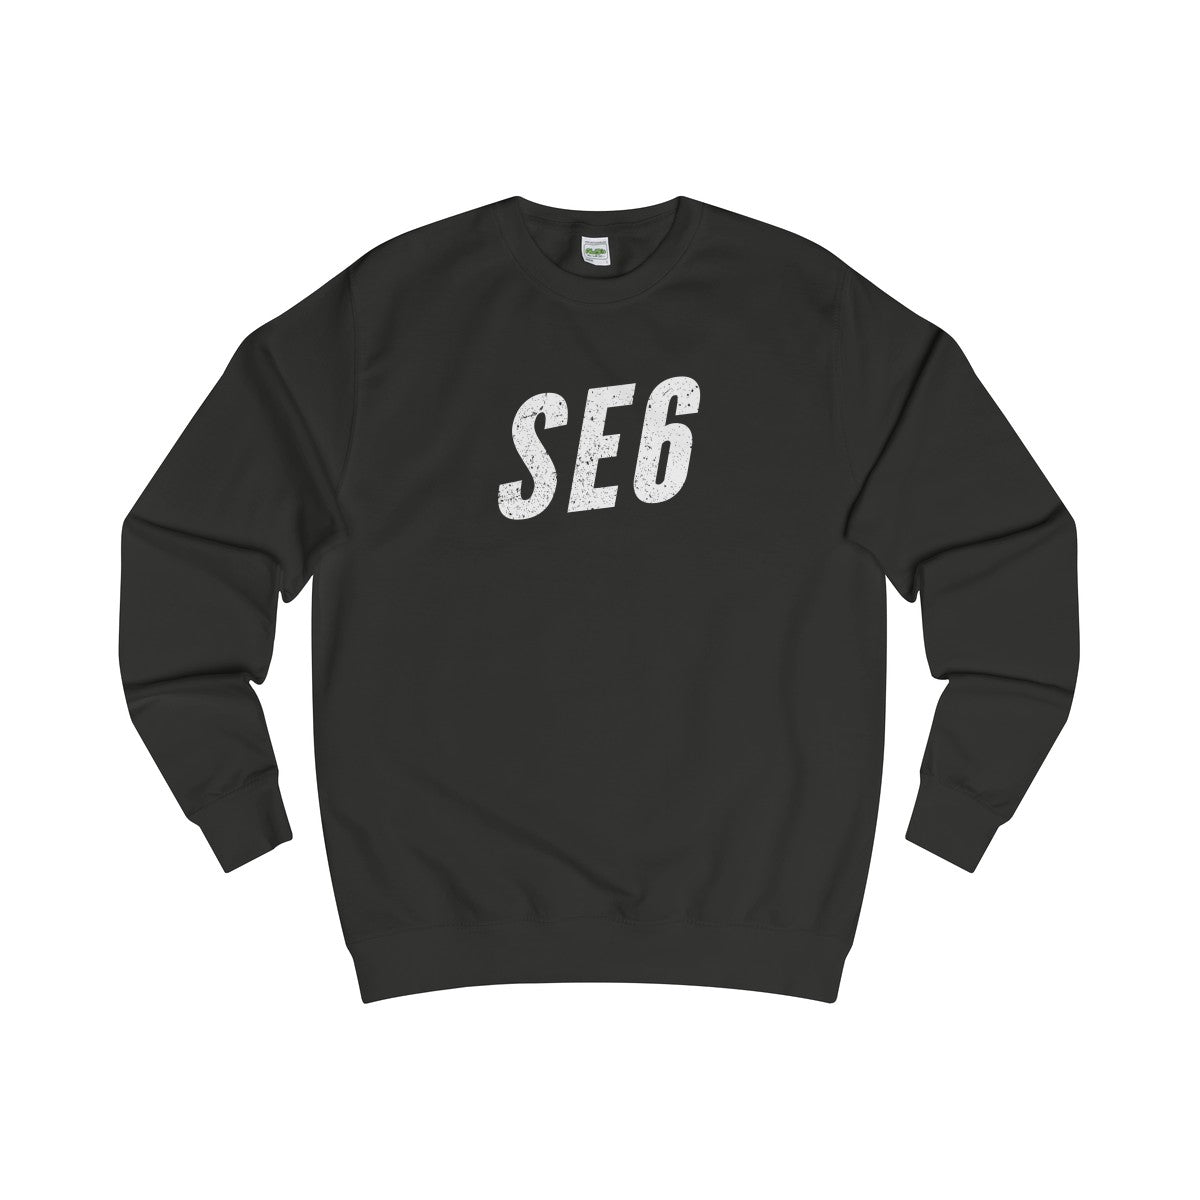 Hither Green SE6 Sweater